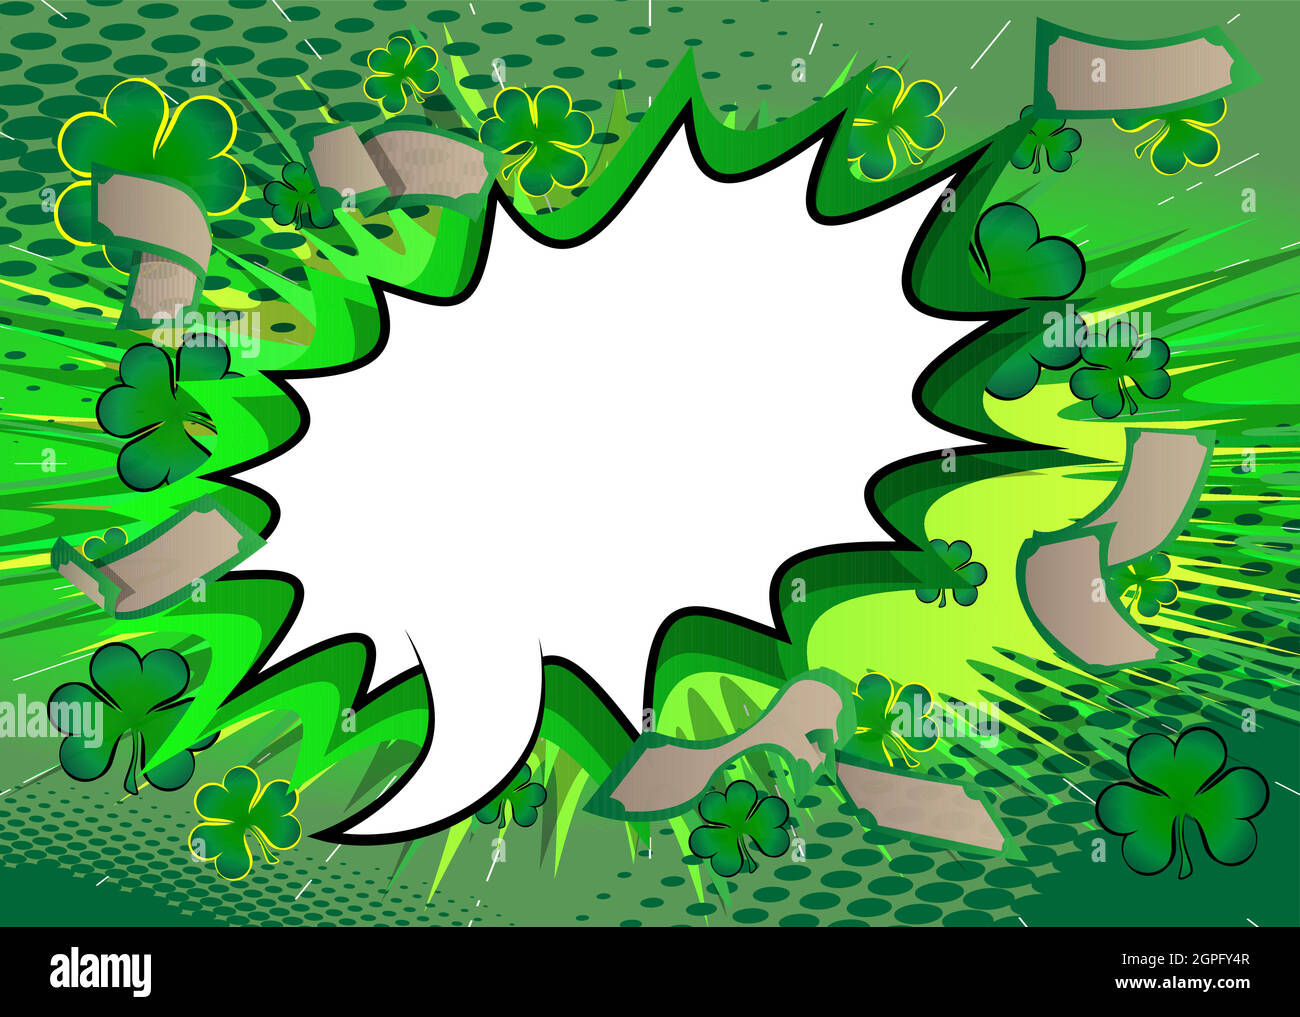 Luck related comic book background. Stock Vector